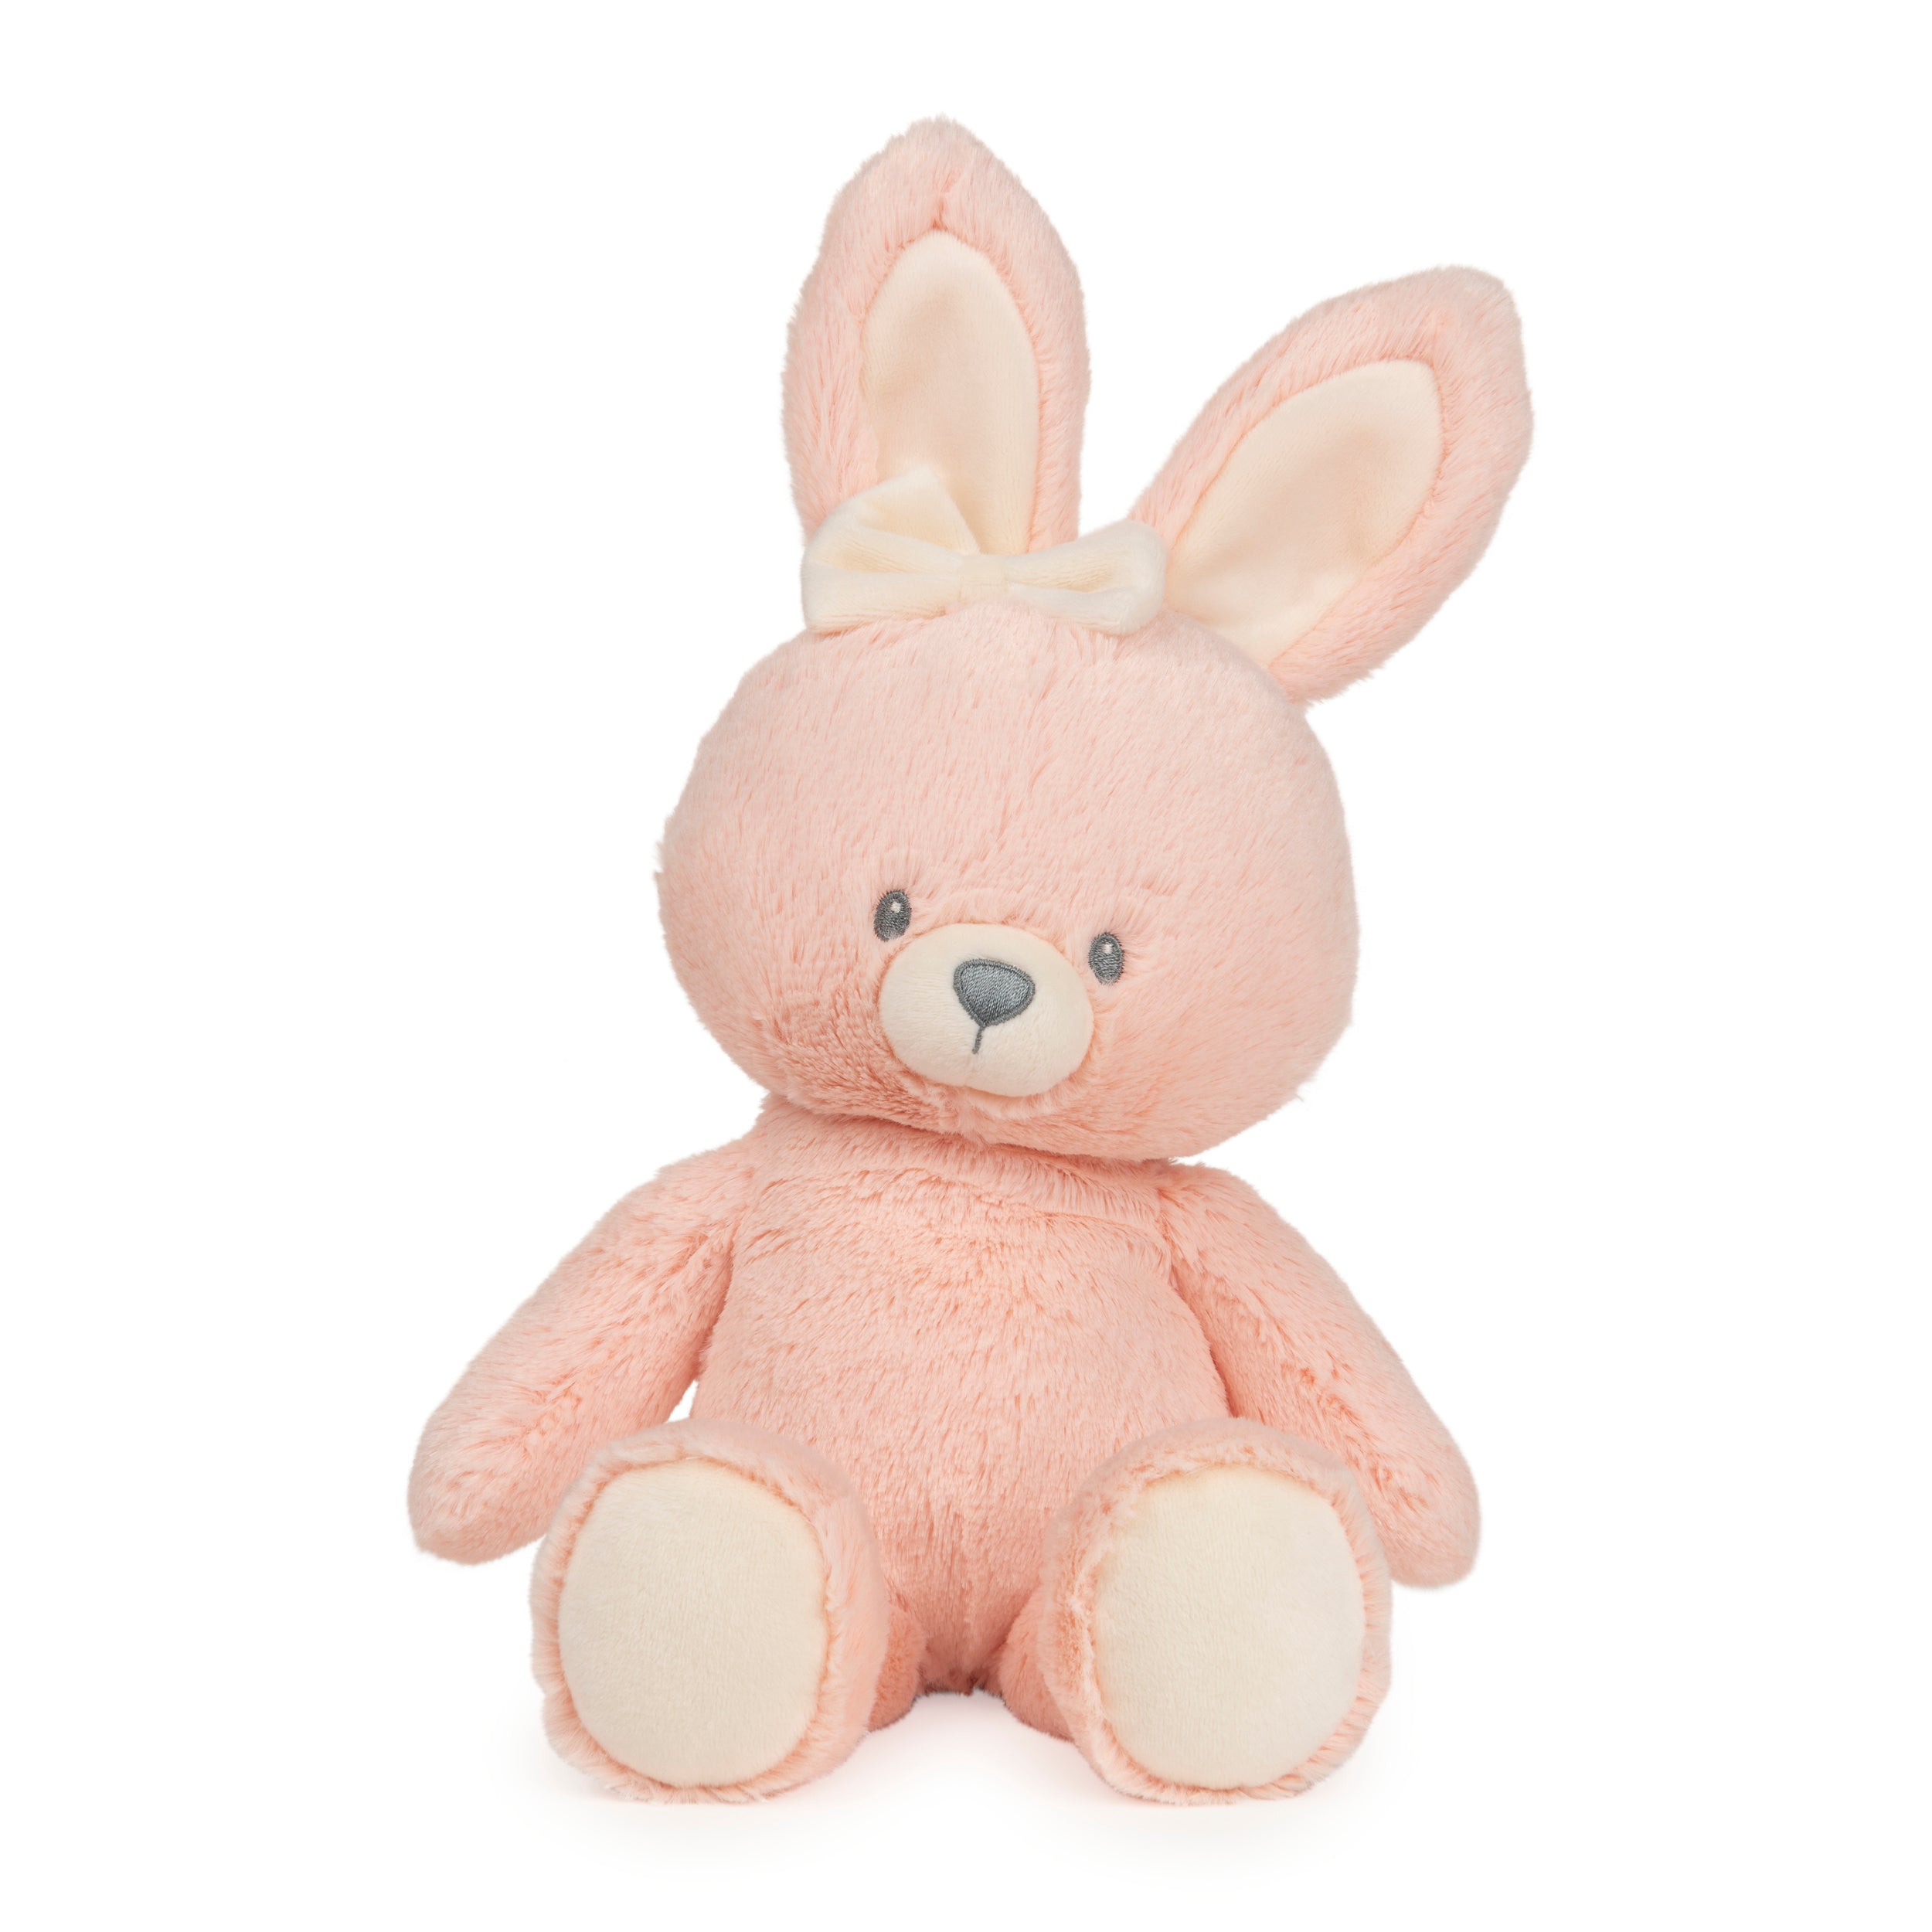 Baby Gund Oh So Snuggly Bunny Large Plush Stuffed Animal For Babies And  Infants, Dusty Rose Pink, 12.5”